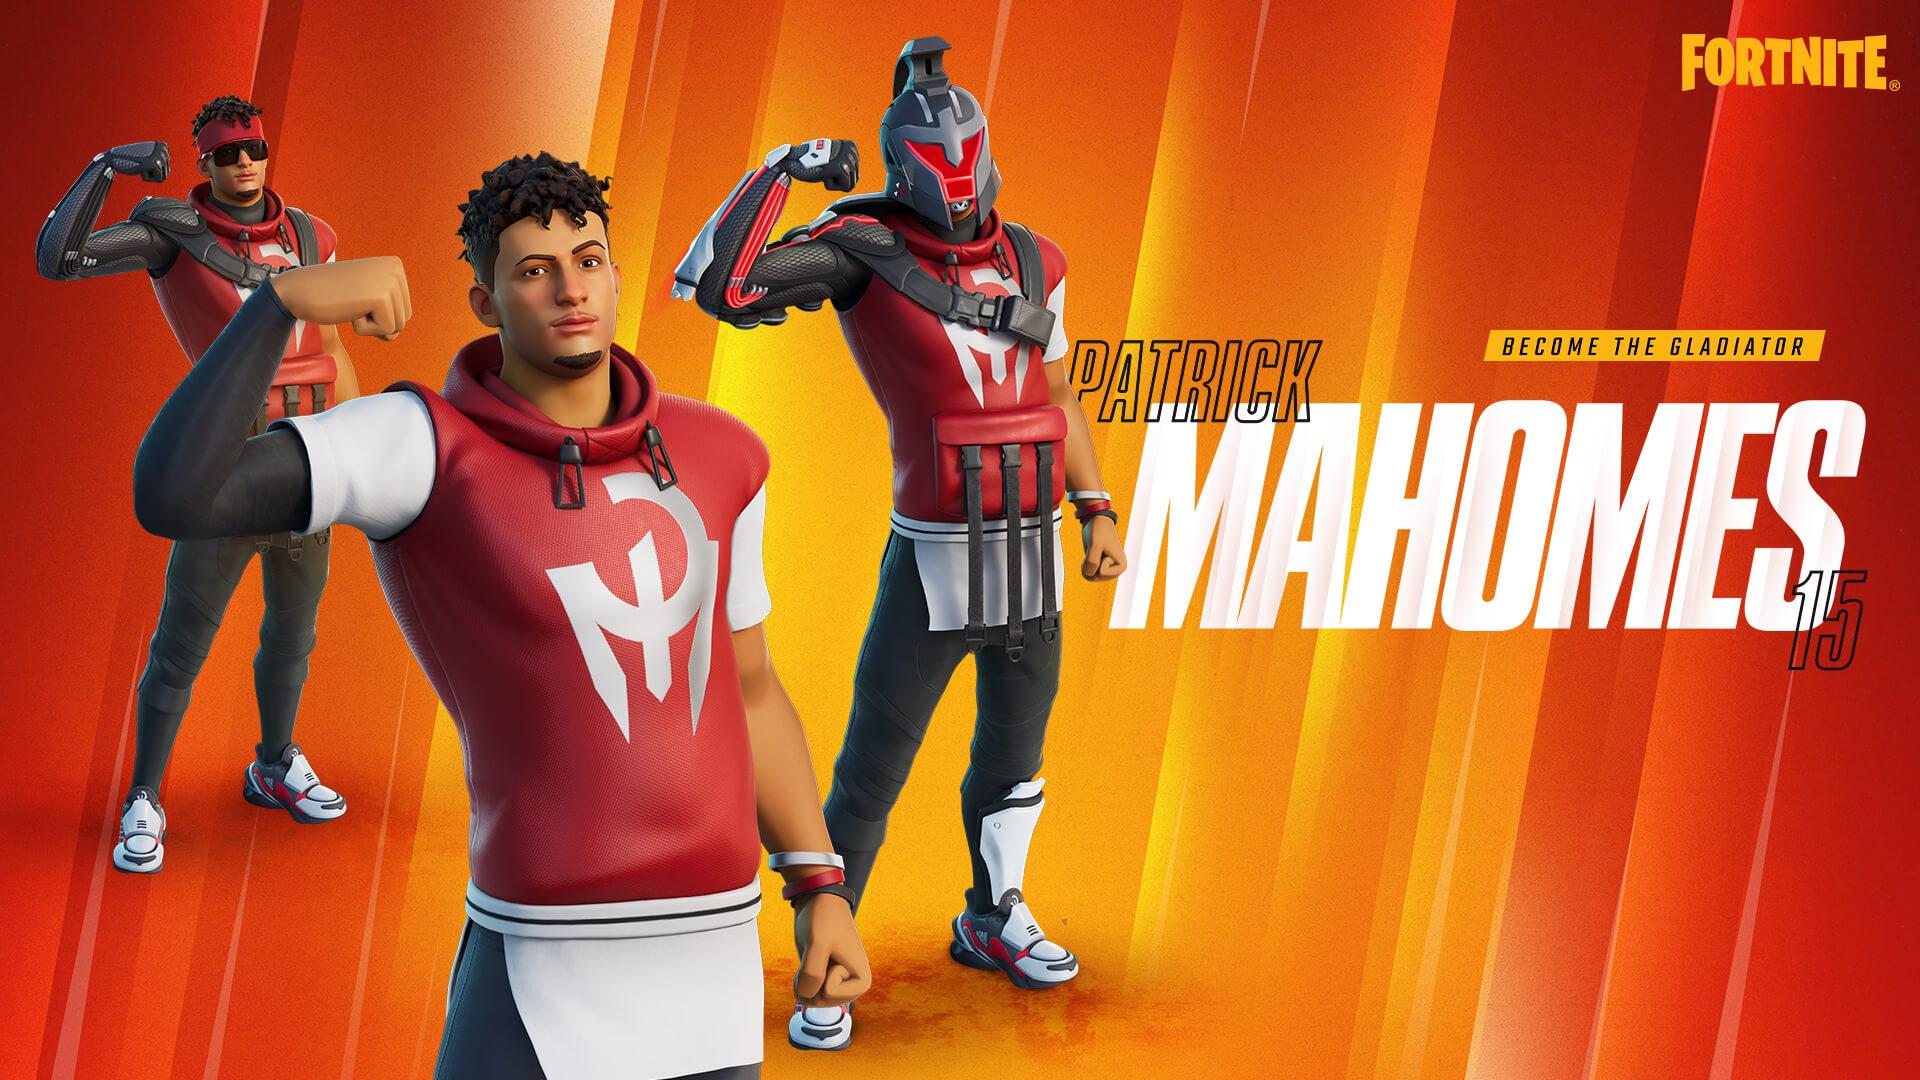 Fortnite Patrick Mahomes Outfit